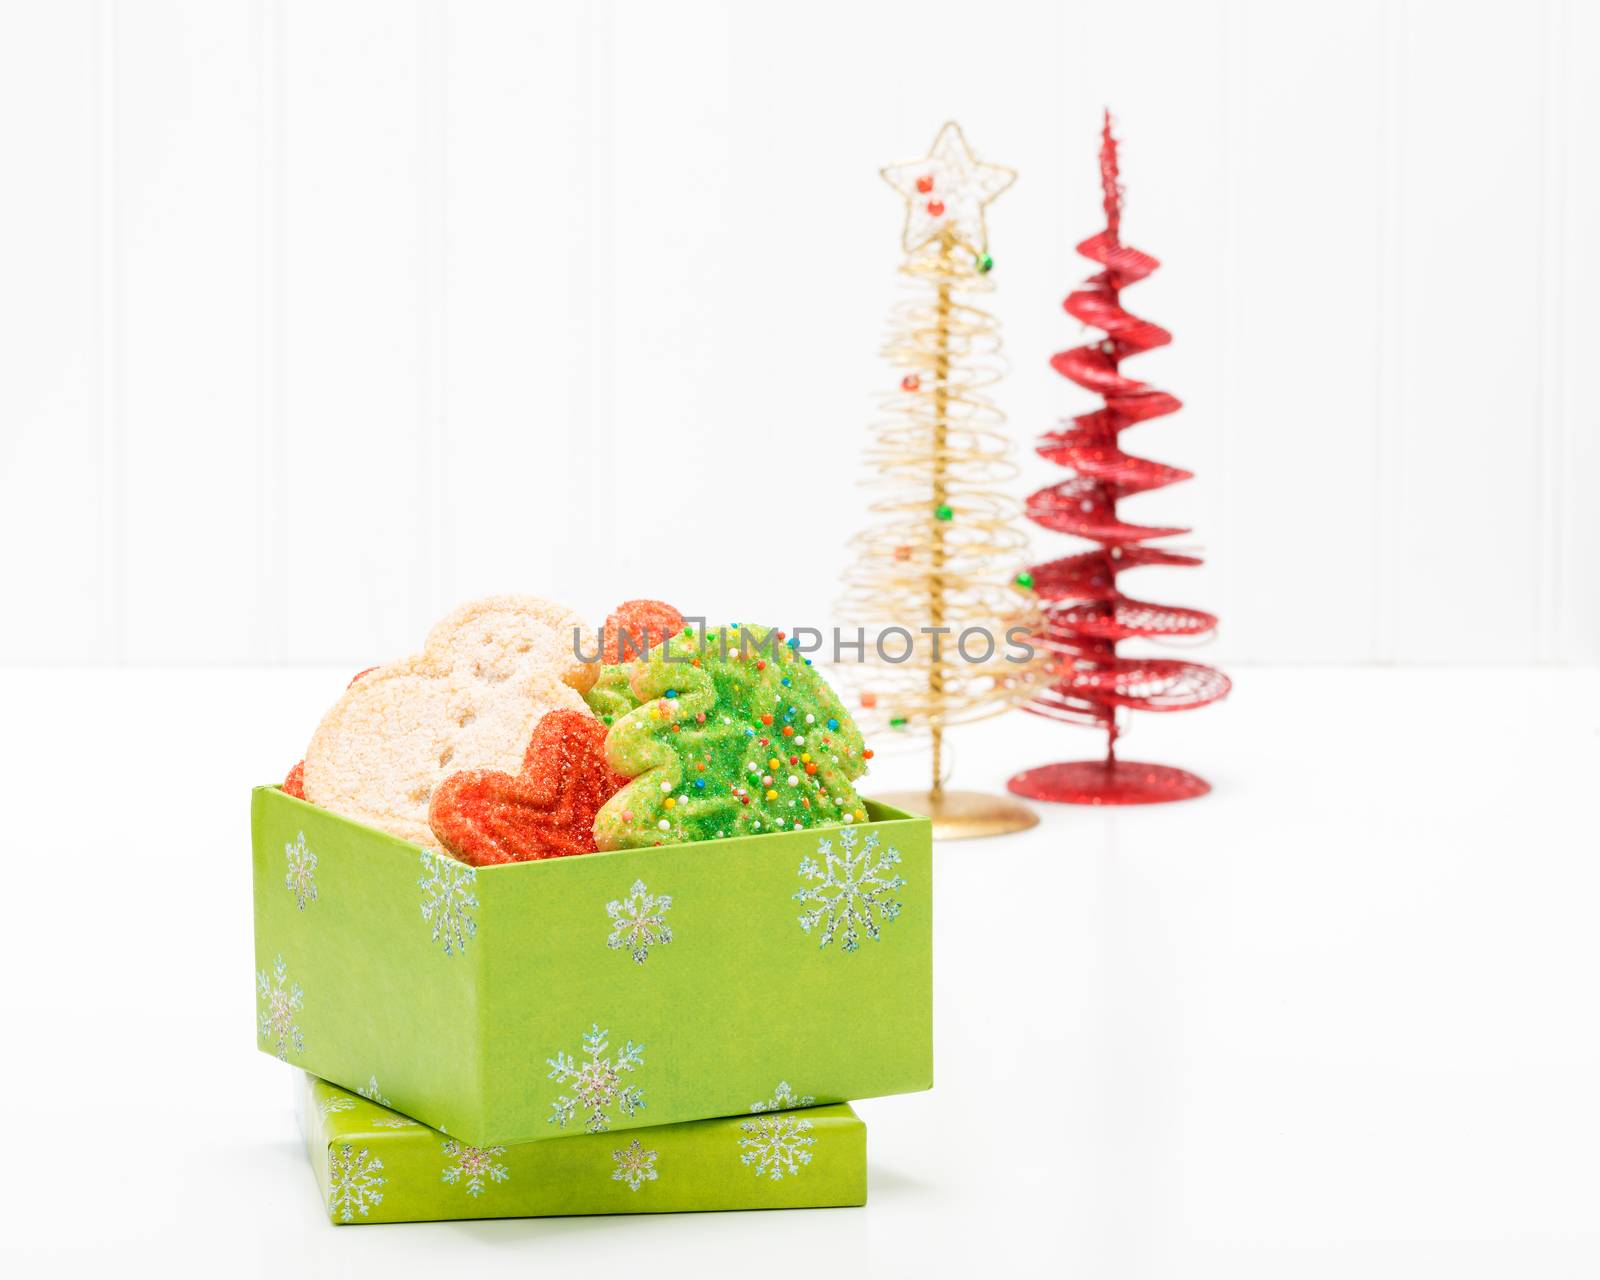 Christmas Sugar Cookies by billberryphotography